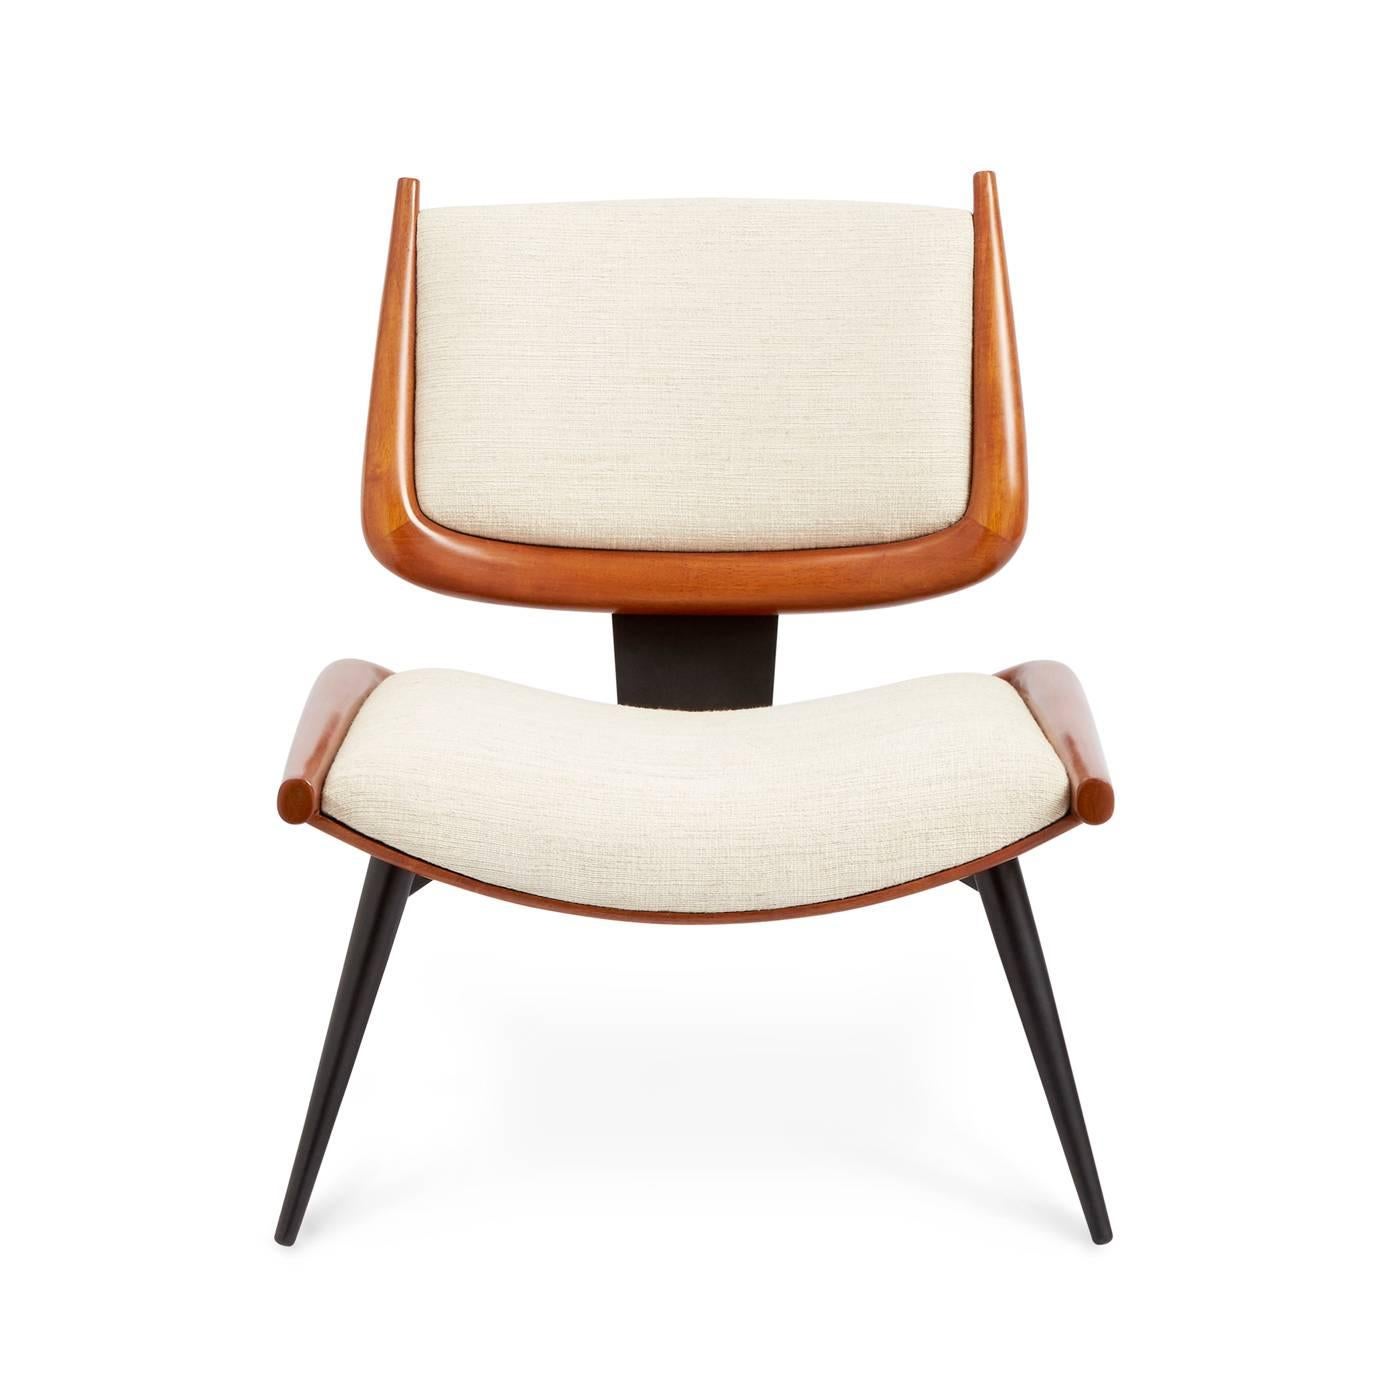 Warm Modernism. As chic from the back as it is from the front, the St. Germain accent chair features a dash of Japanese rigor, a hint of Scandinavian Modernism, and a full dose of chic.

Low and loungey with a curvy and comfortable seat and an